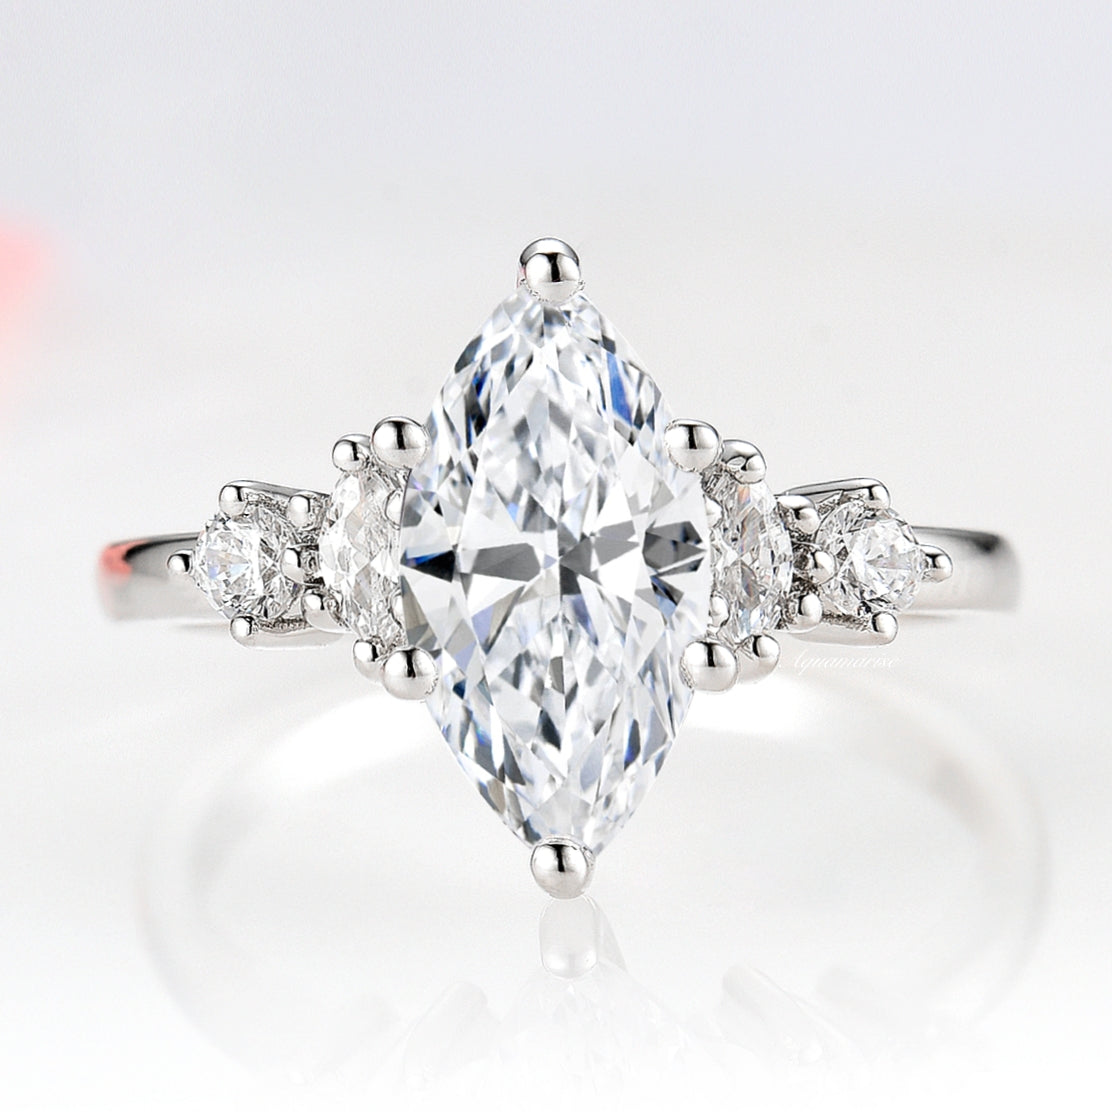 1.5CT Marquise Cut Simulated Diamond Wedding Ring- 14K White Gold Ring